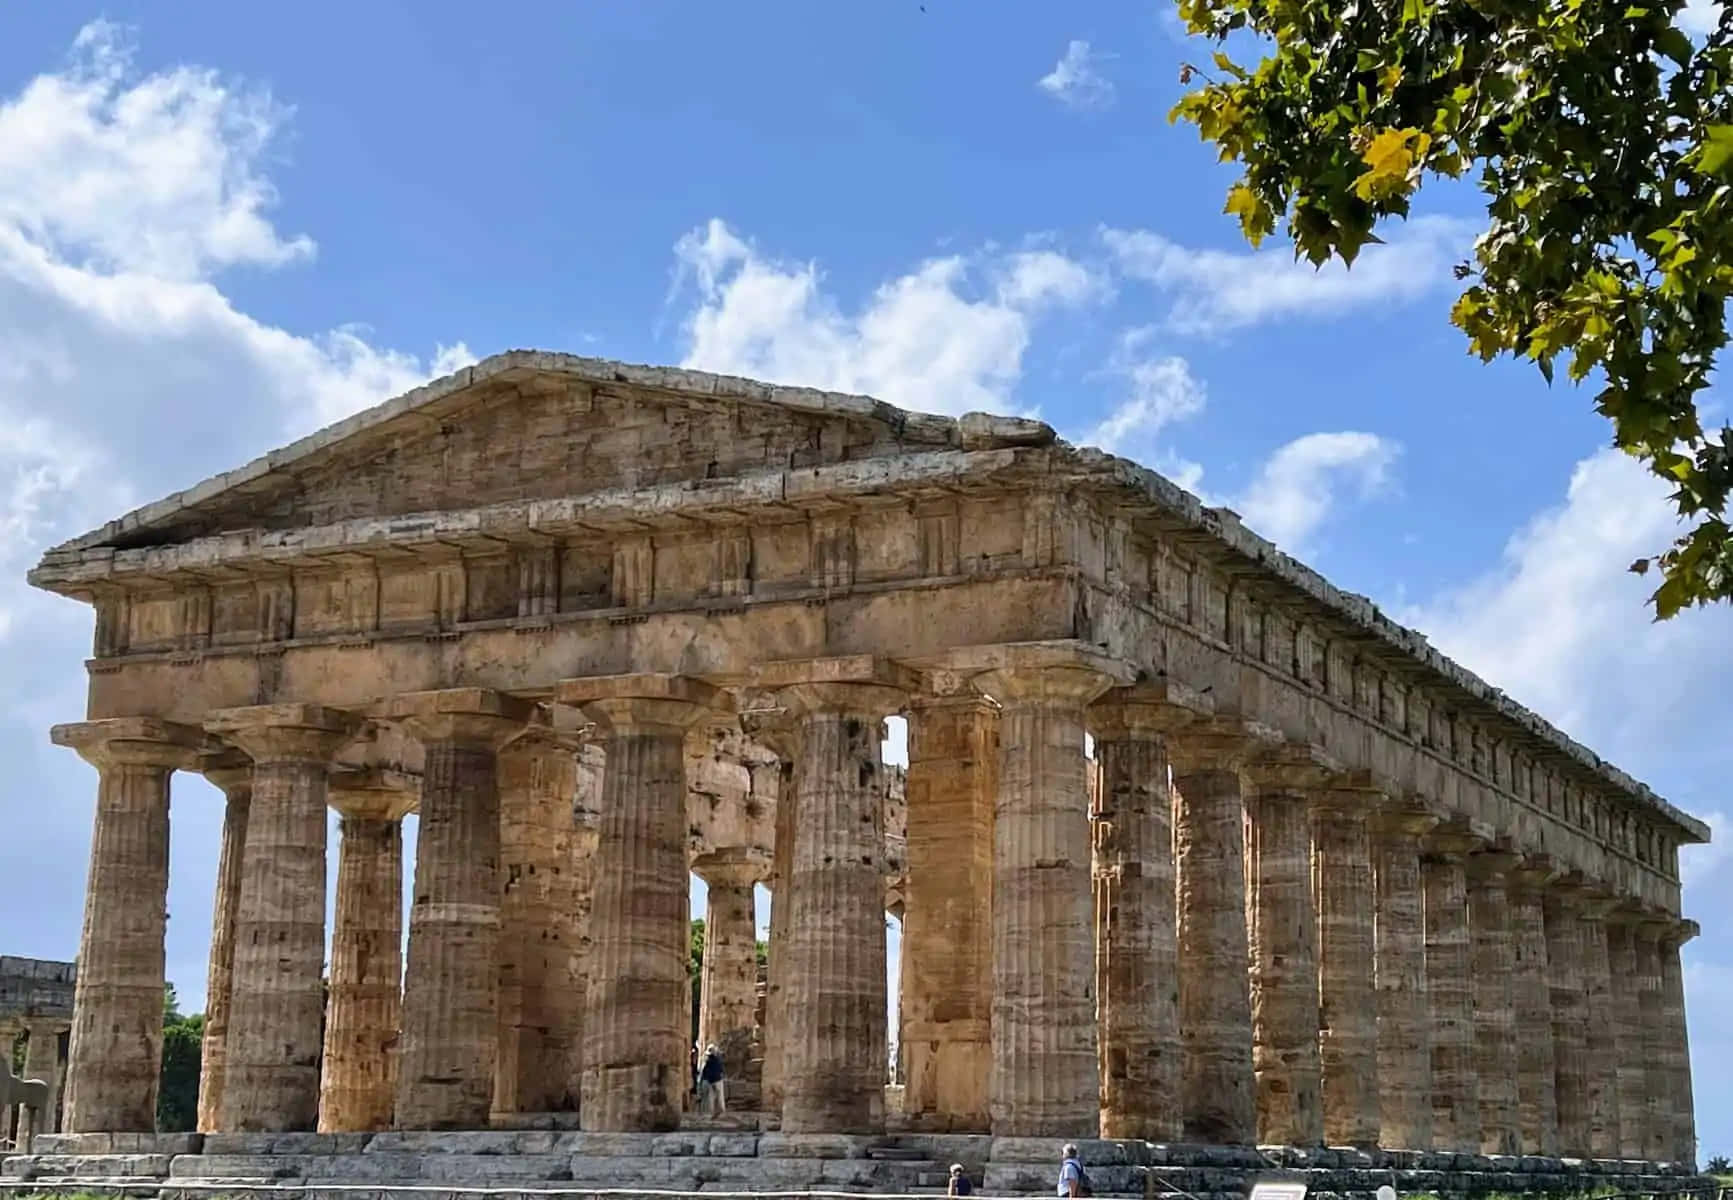 Paestumöverlevande Byggnad. (note: This Is A Direct Translation. It Is Unclear How It Relates To Computer Or Mobile Wallpaper As The Context Is Not Provided). Wallpaper